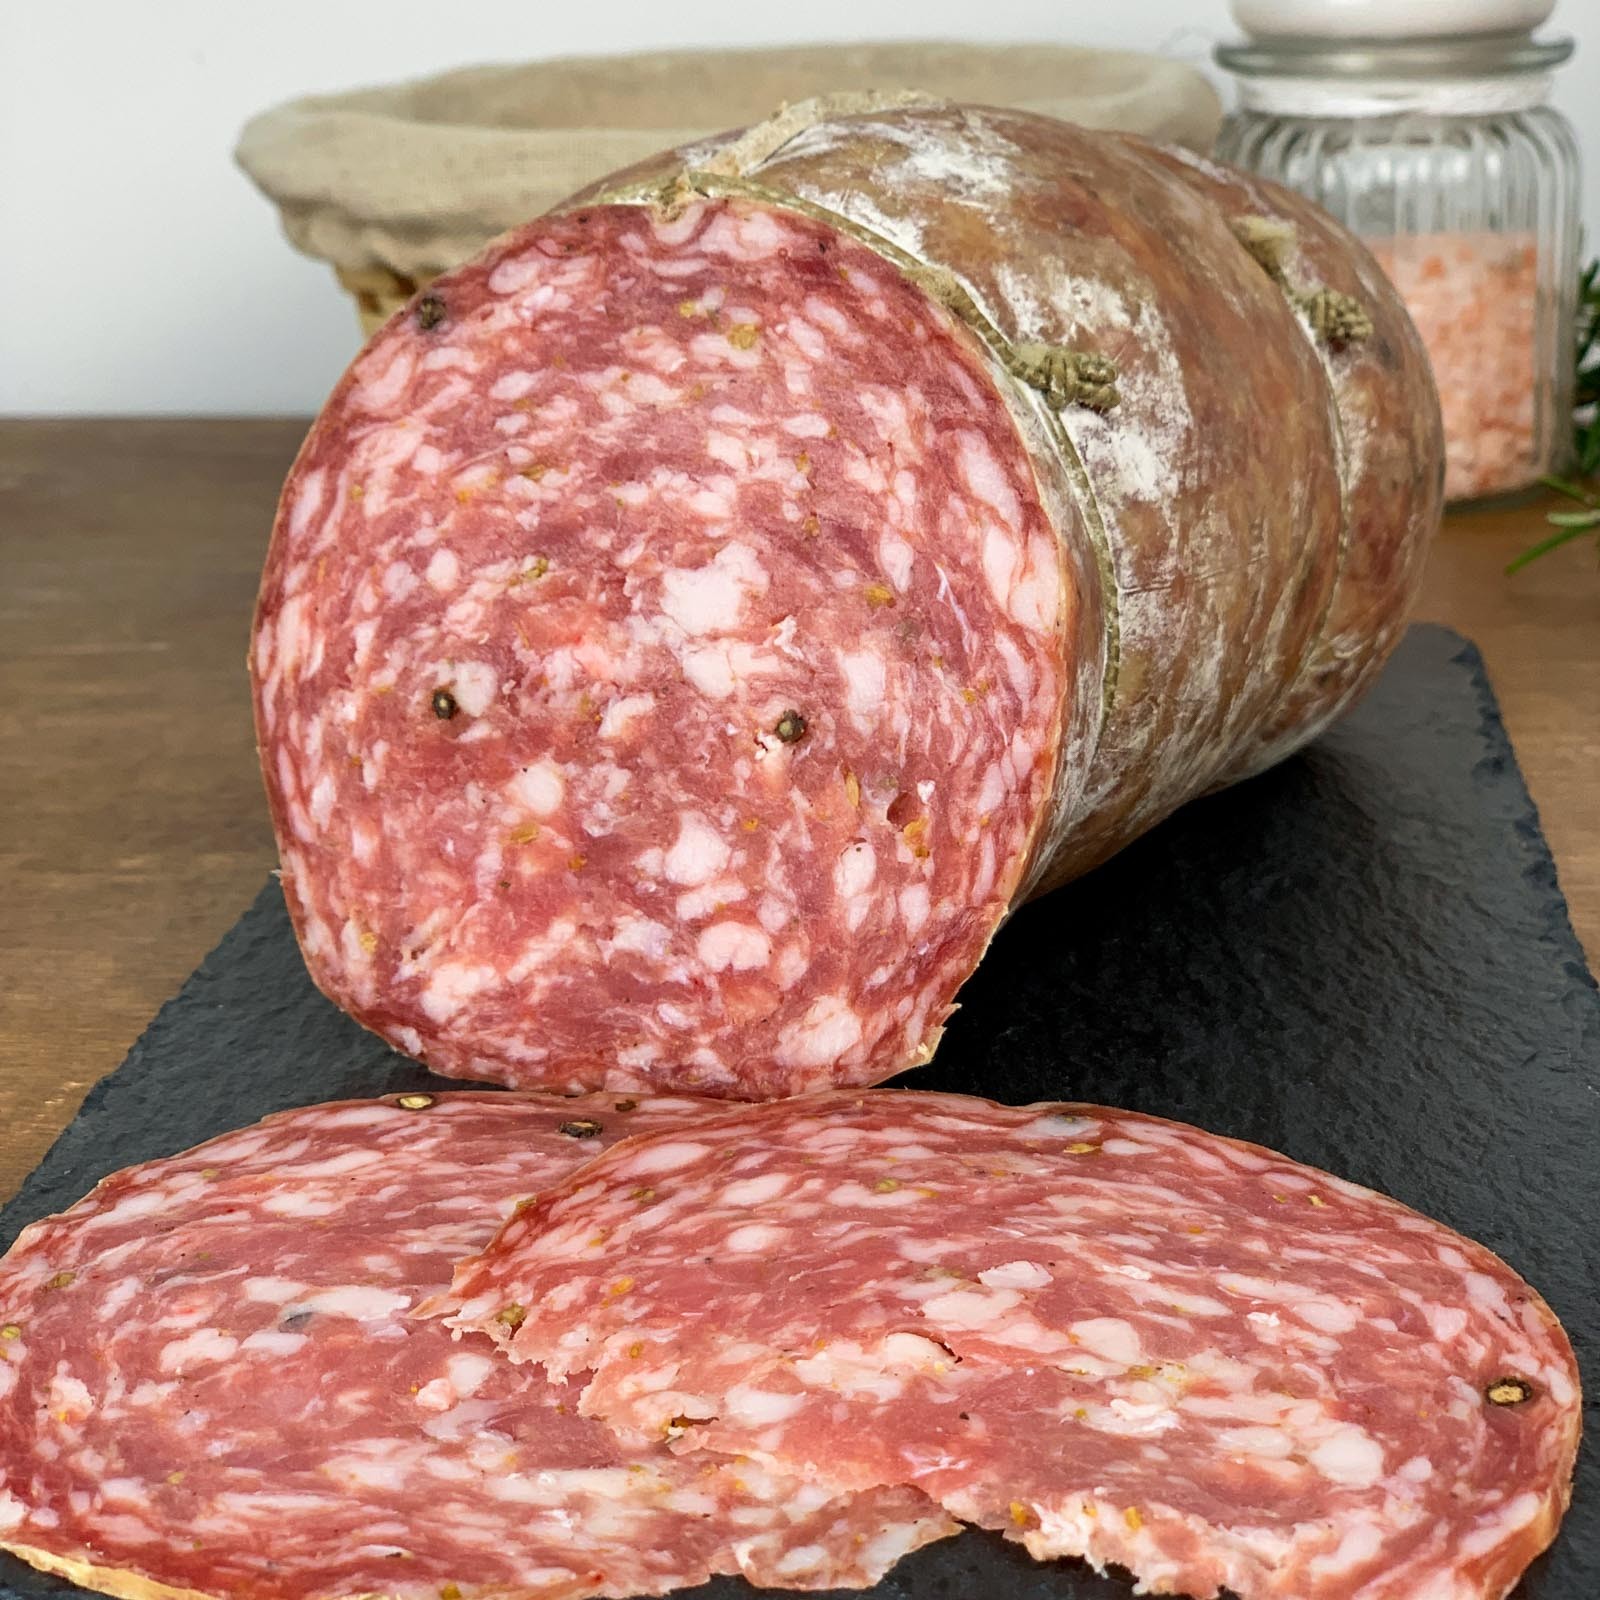 PGI Finocchiona is one of the most famous Tuscan cured meats. It is produced with pork of excellent quality, minced and kneaded, to which wild fennel seeds are added, which give it the characteristic fresh and at the same time intense aroma. This version of PGI Finocchiona has a net weight of about 1,5 kg, is vacuum packed and is characterized by a large slice of about 10 centimeters in diameter.